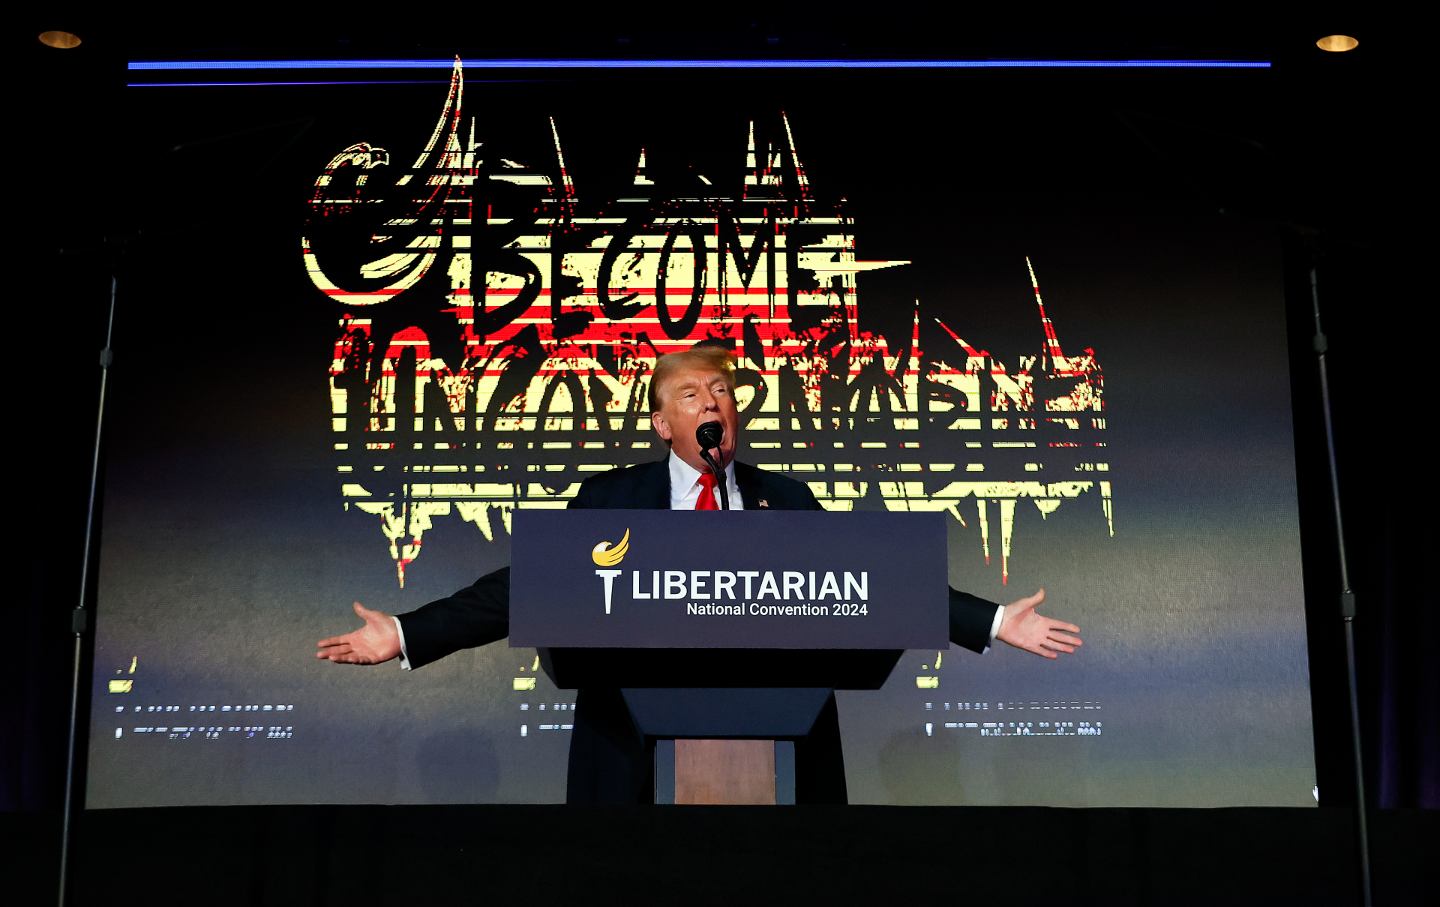 Donald Trump addresses the Libertarian Party National Convention at the Washington Hilton on May 25, 2024 in Washington, DC.